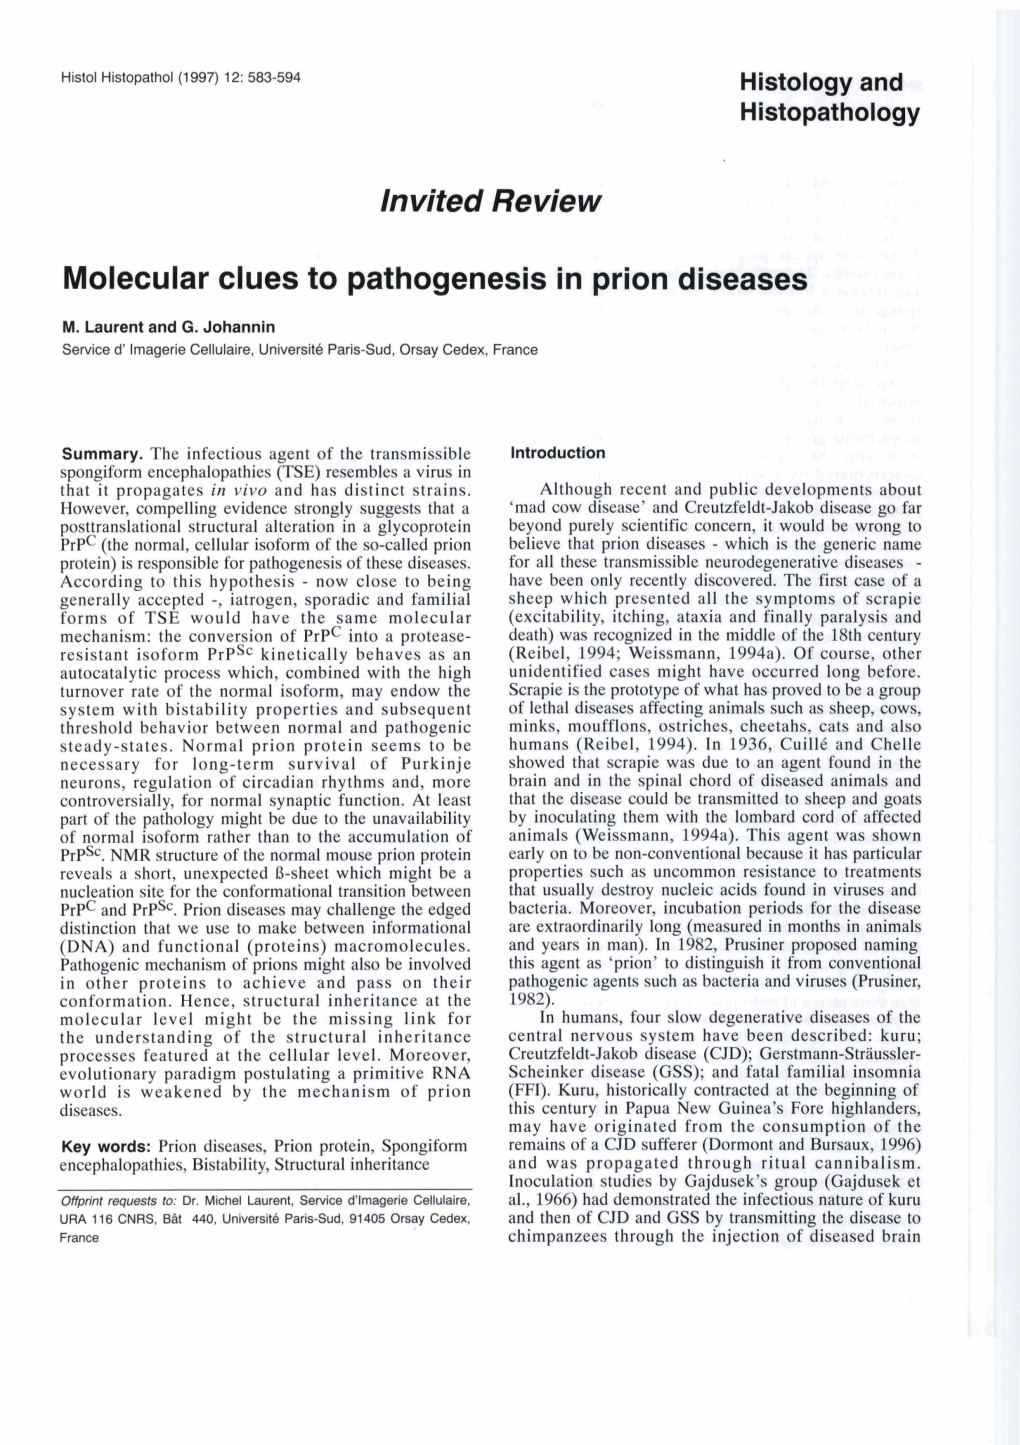 Ln Vited Revie W Molecular Clues to Pathogenesis in Prion Diseases